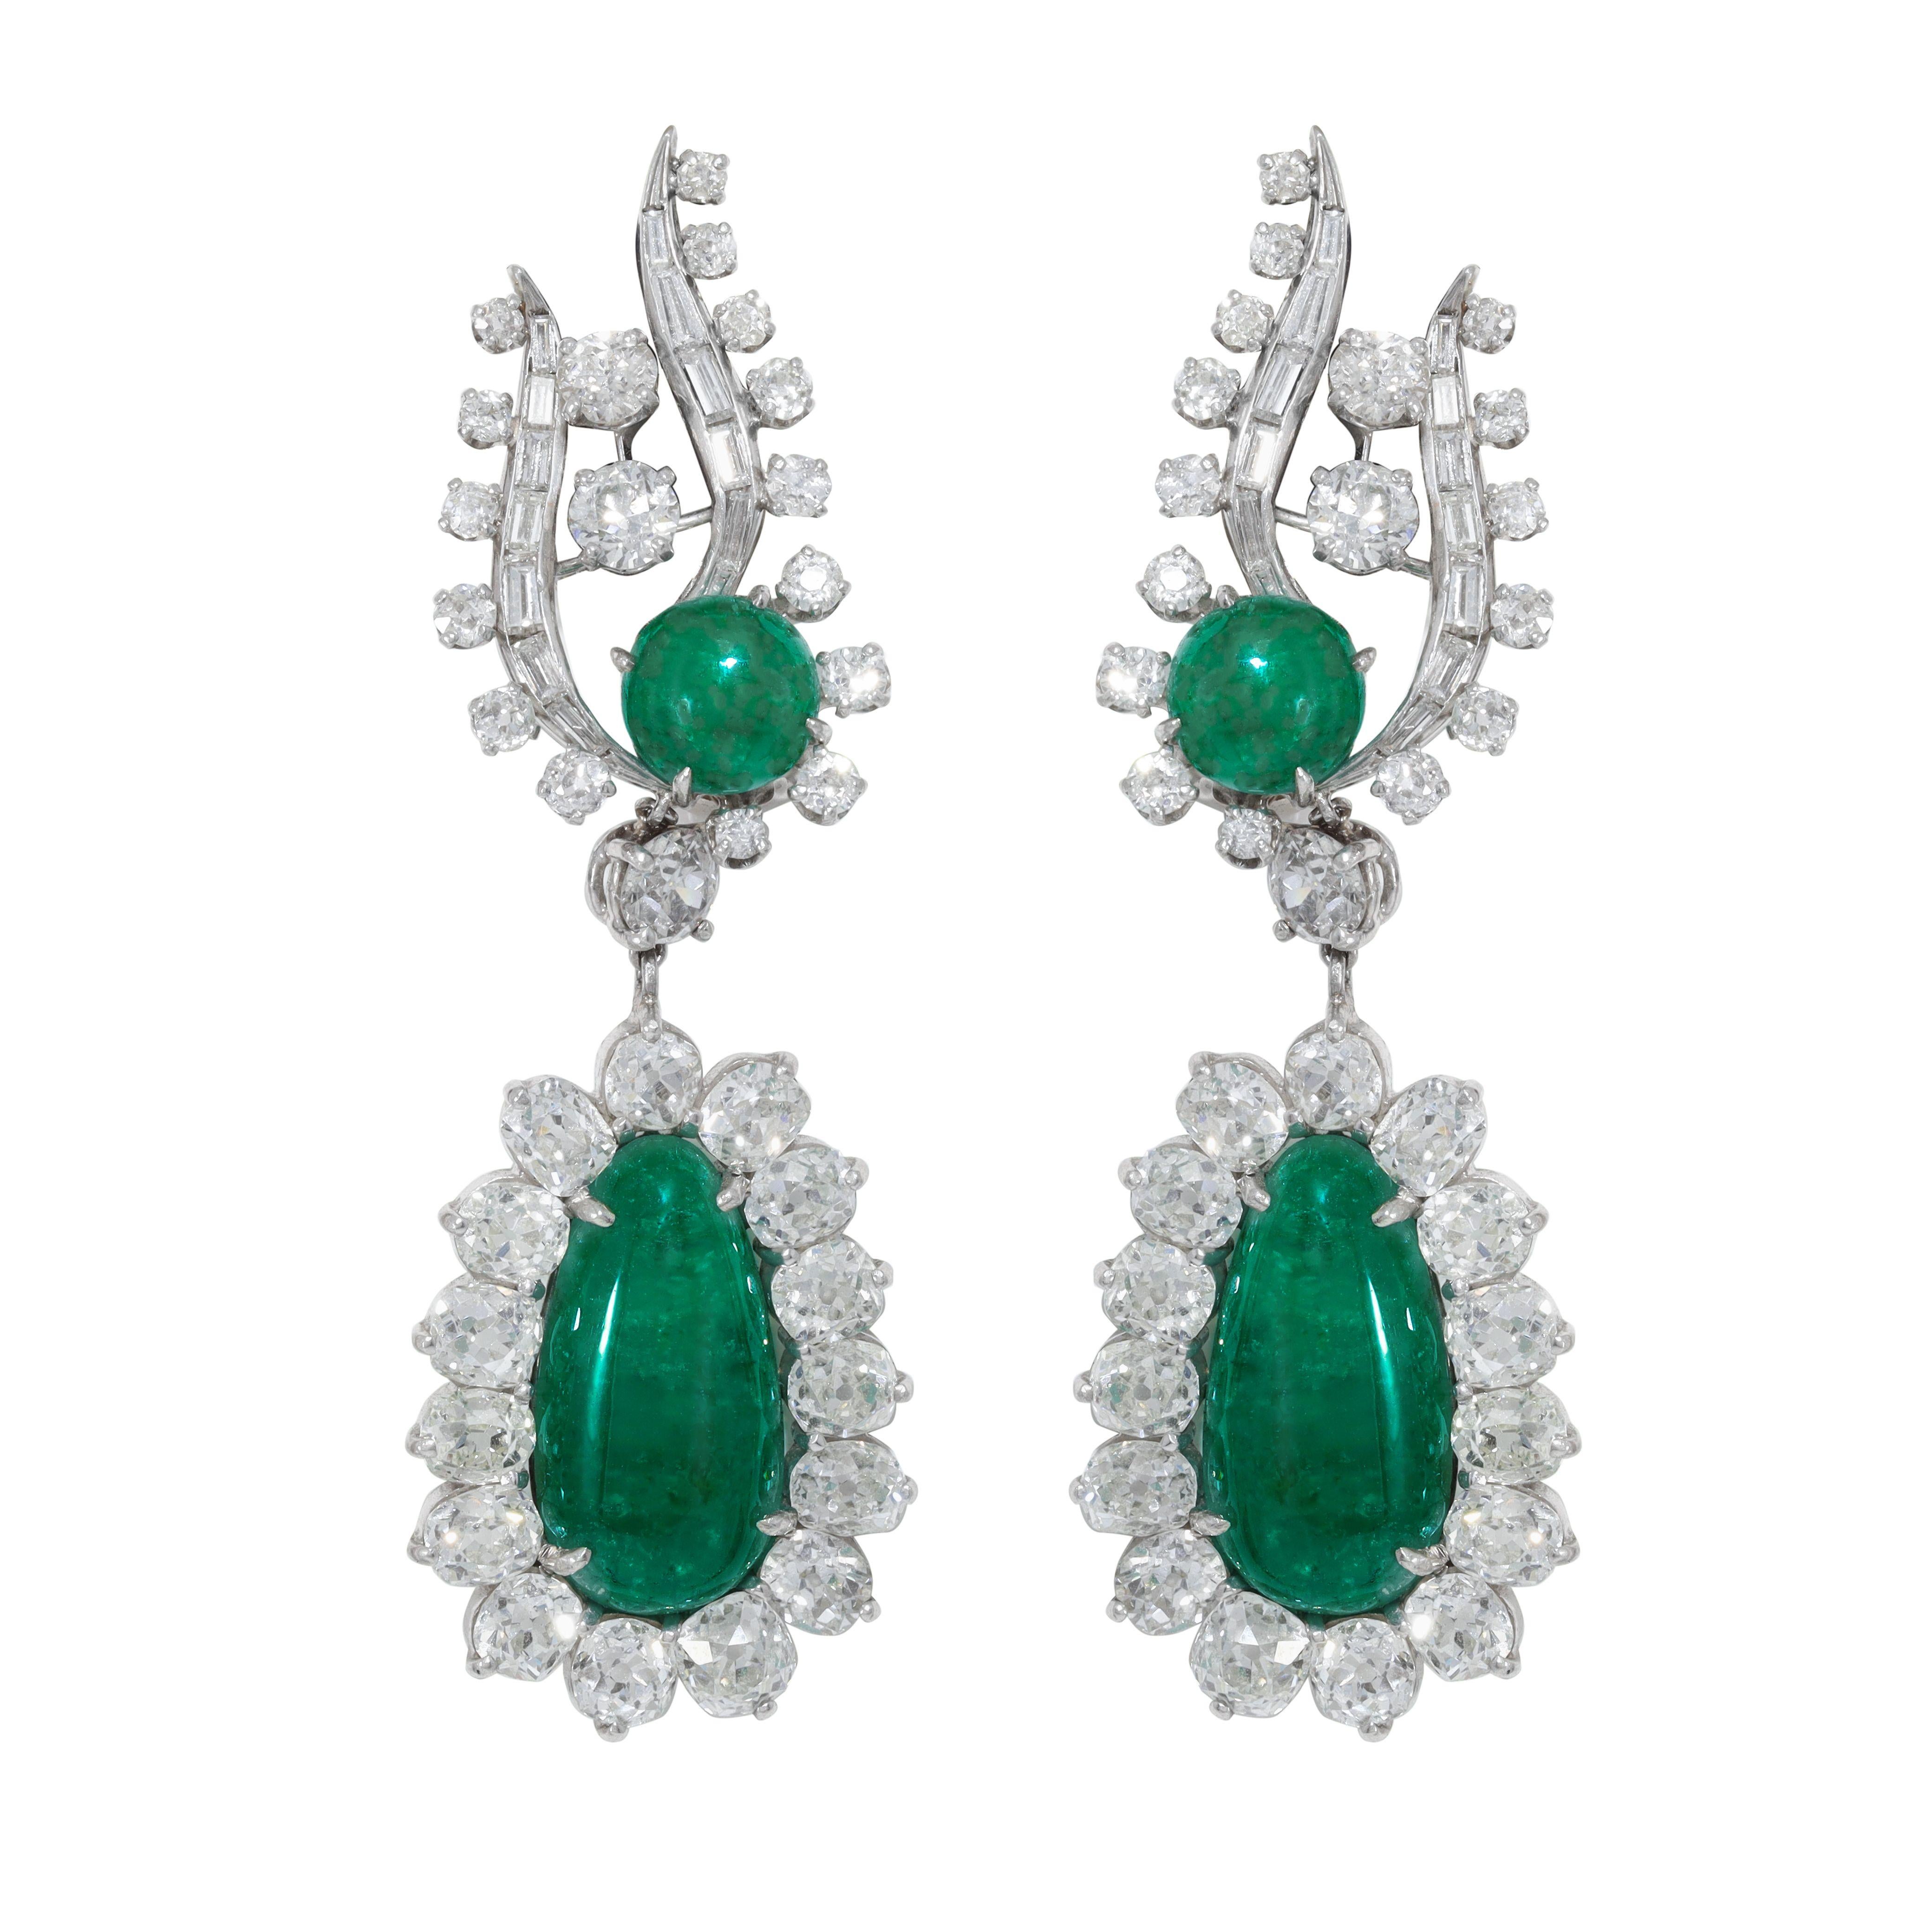 Luxurious French  Emerald Earrings. 18 Ct. of Natural cabochon Colombian Emeralds with 15.00 Ct. round and cushion shaped diamonds, European Cut.